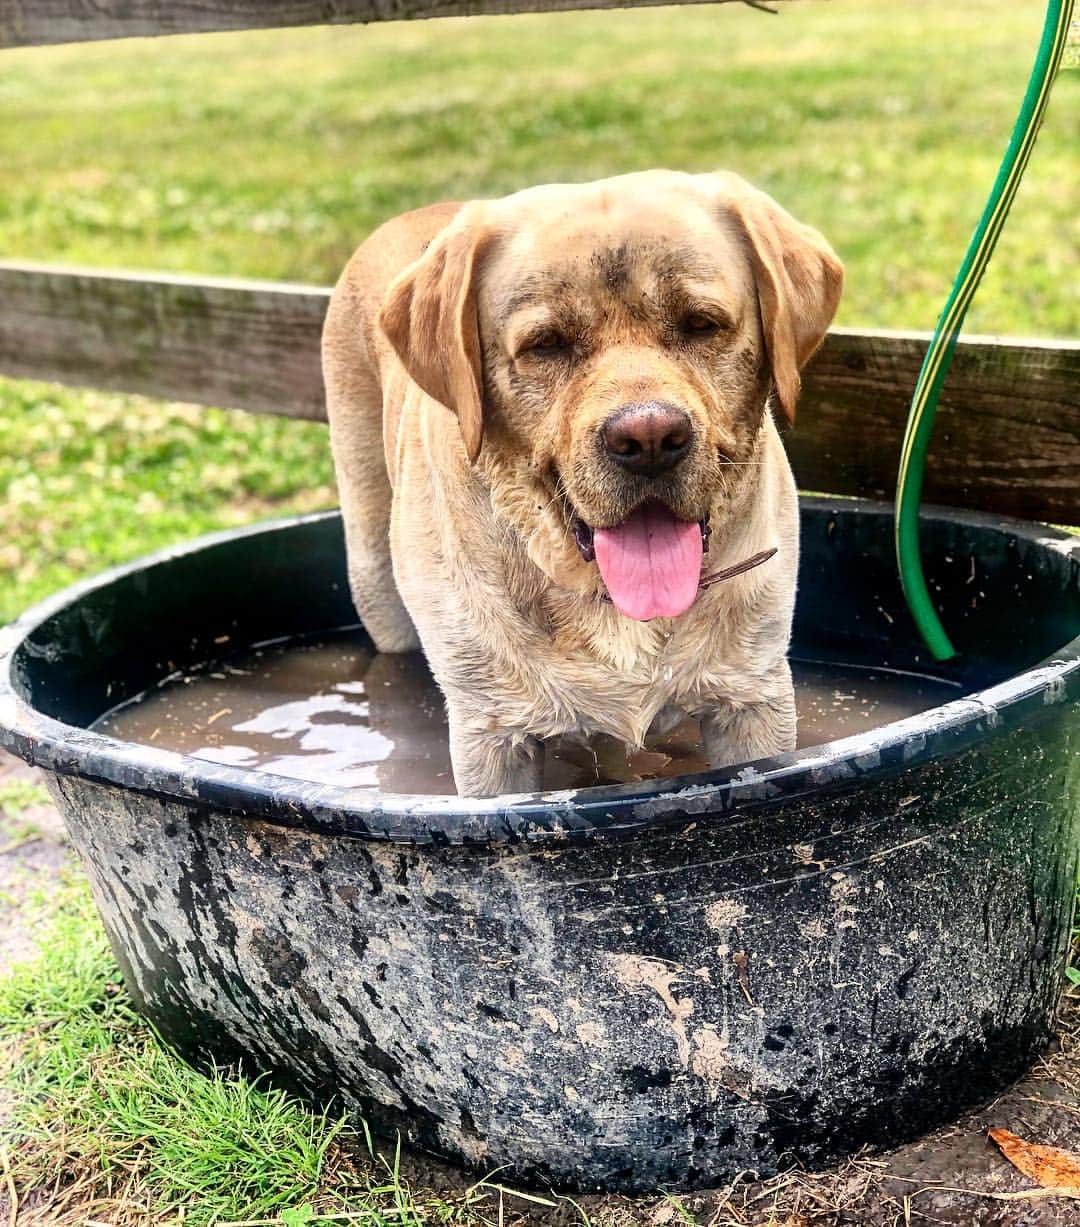 Huckのインスタグラム：「Sunday’s are for jumping in the horse troughs 🤙🏼💦🐴 #talesofalab #thelablove_feature #fab_labs_ #labrador_class #yellowlabsofinstagram #instalabs #labphotooftheday #huckthehunk #retrieversgram #worldofmylab #englishlabrador」